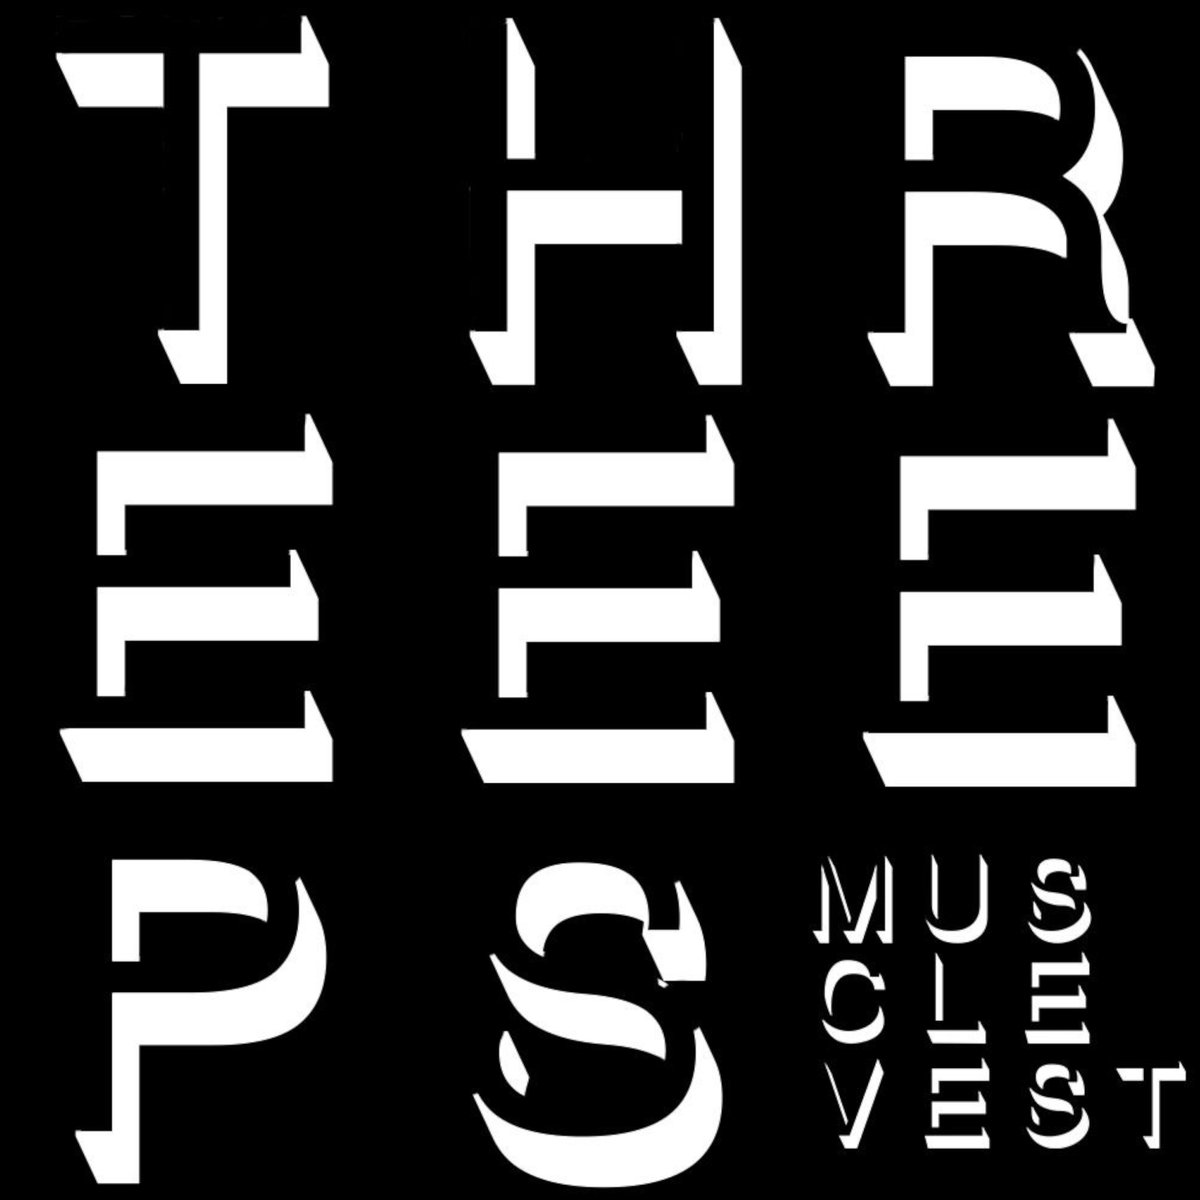 🚨NEW RELEASE TIME 🚨 THREEEPS, the brand new compilation album from @vestmuscle is out on all streaming platforms now! #musclevest #gluetrap #threeeps #PrankMonkeyRecords #Punk #Hardcore #metal #noiserock #UKHC